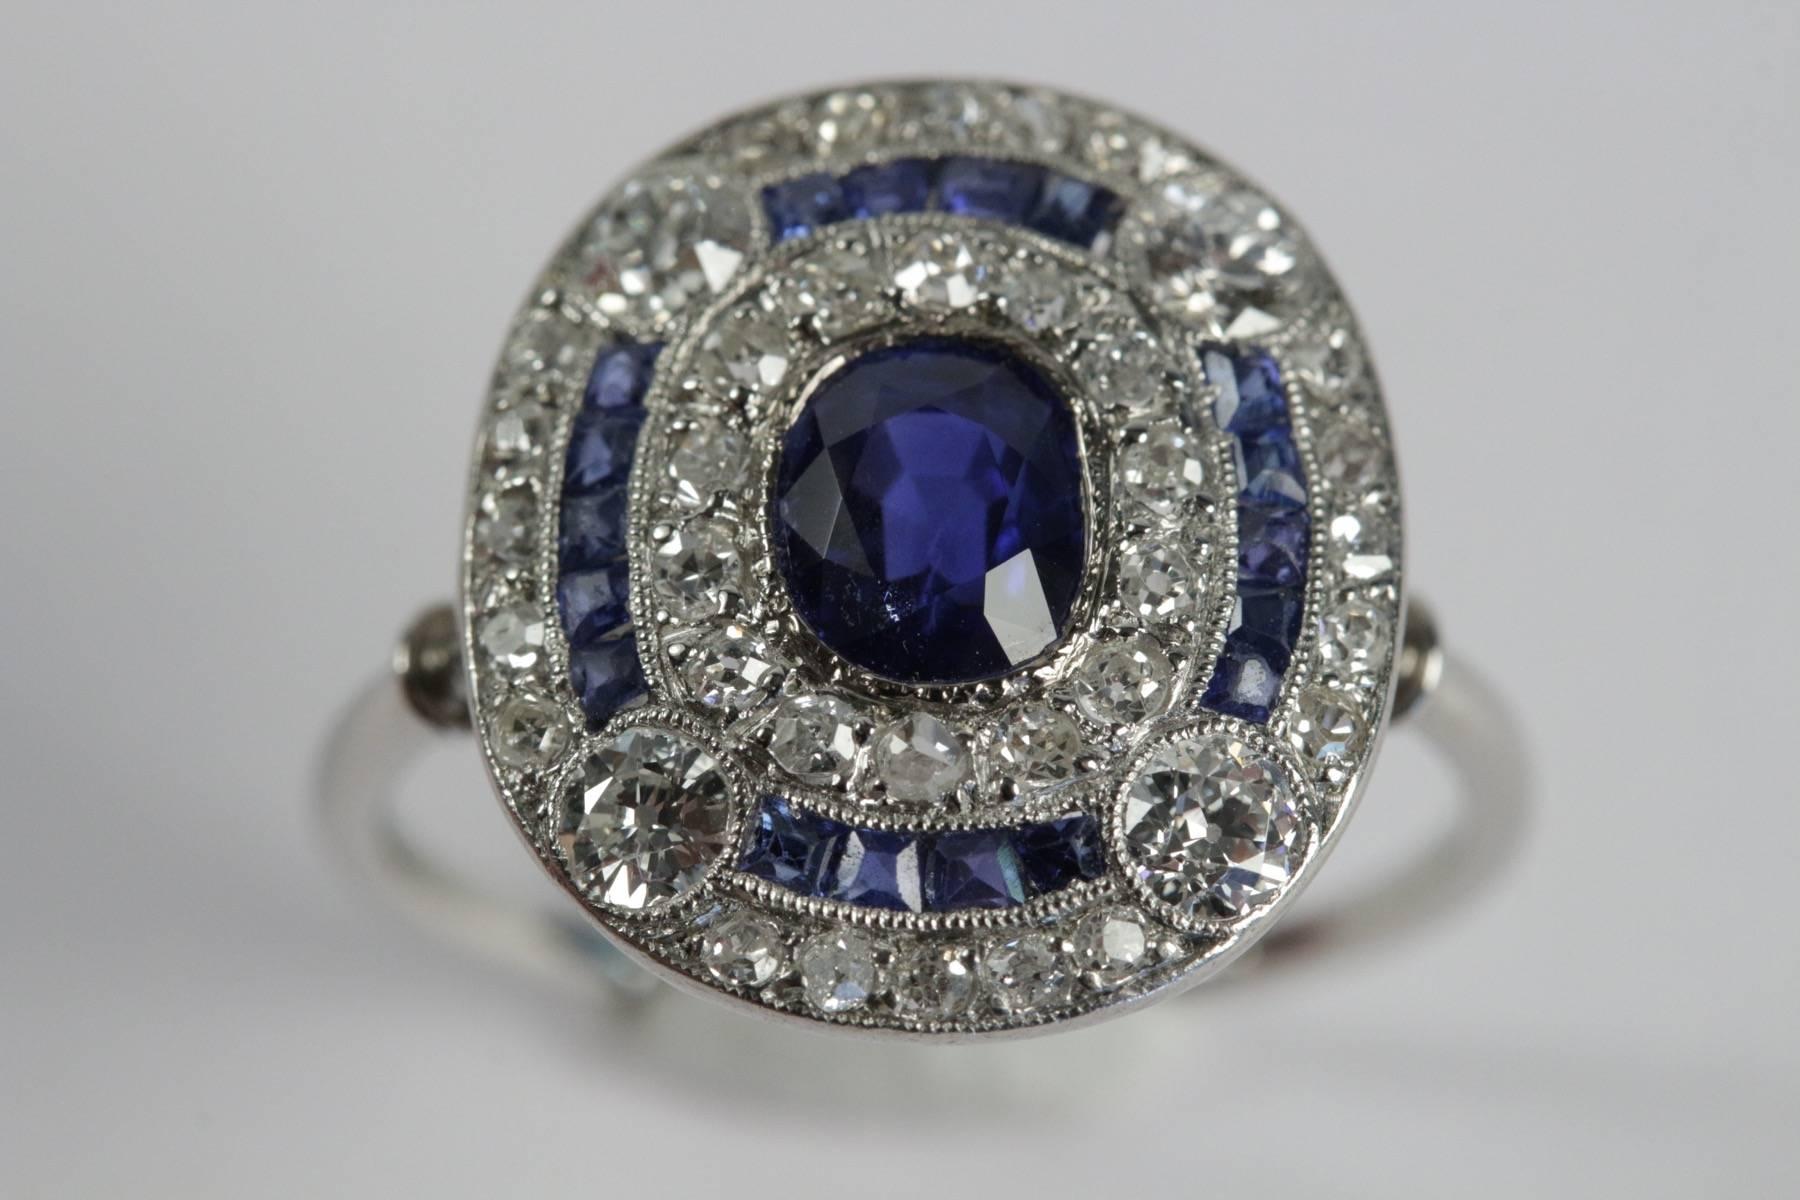 Belle Epoque platinum ring set in the center with natural Burma oval sapphire (no indications of modification or treatment) approximate weight 1.10 carat surrounded with brillant cut diamonds for an approximate total weight of 2.50 carats. Circa